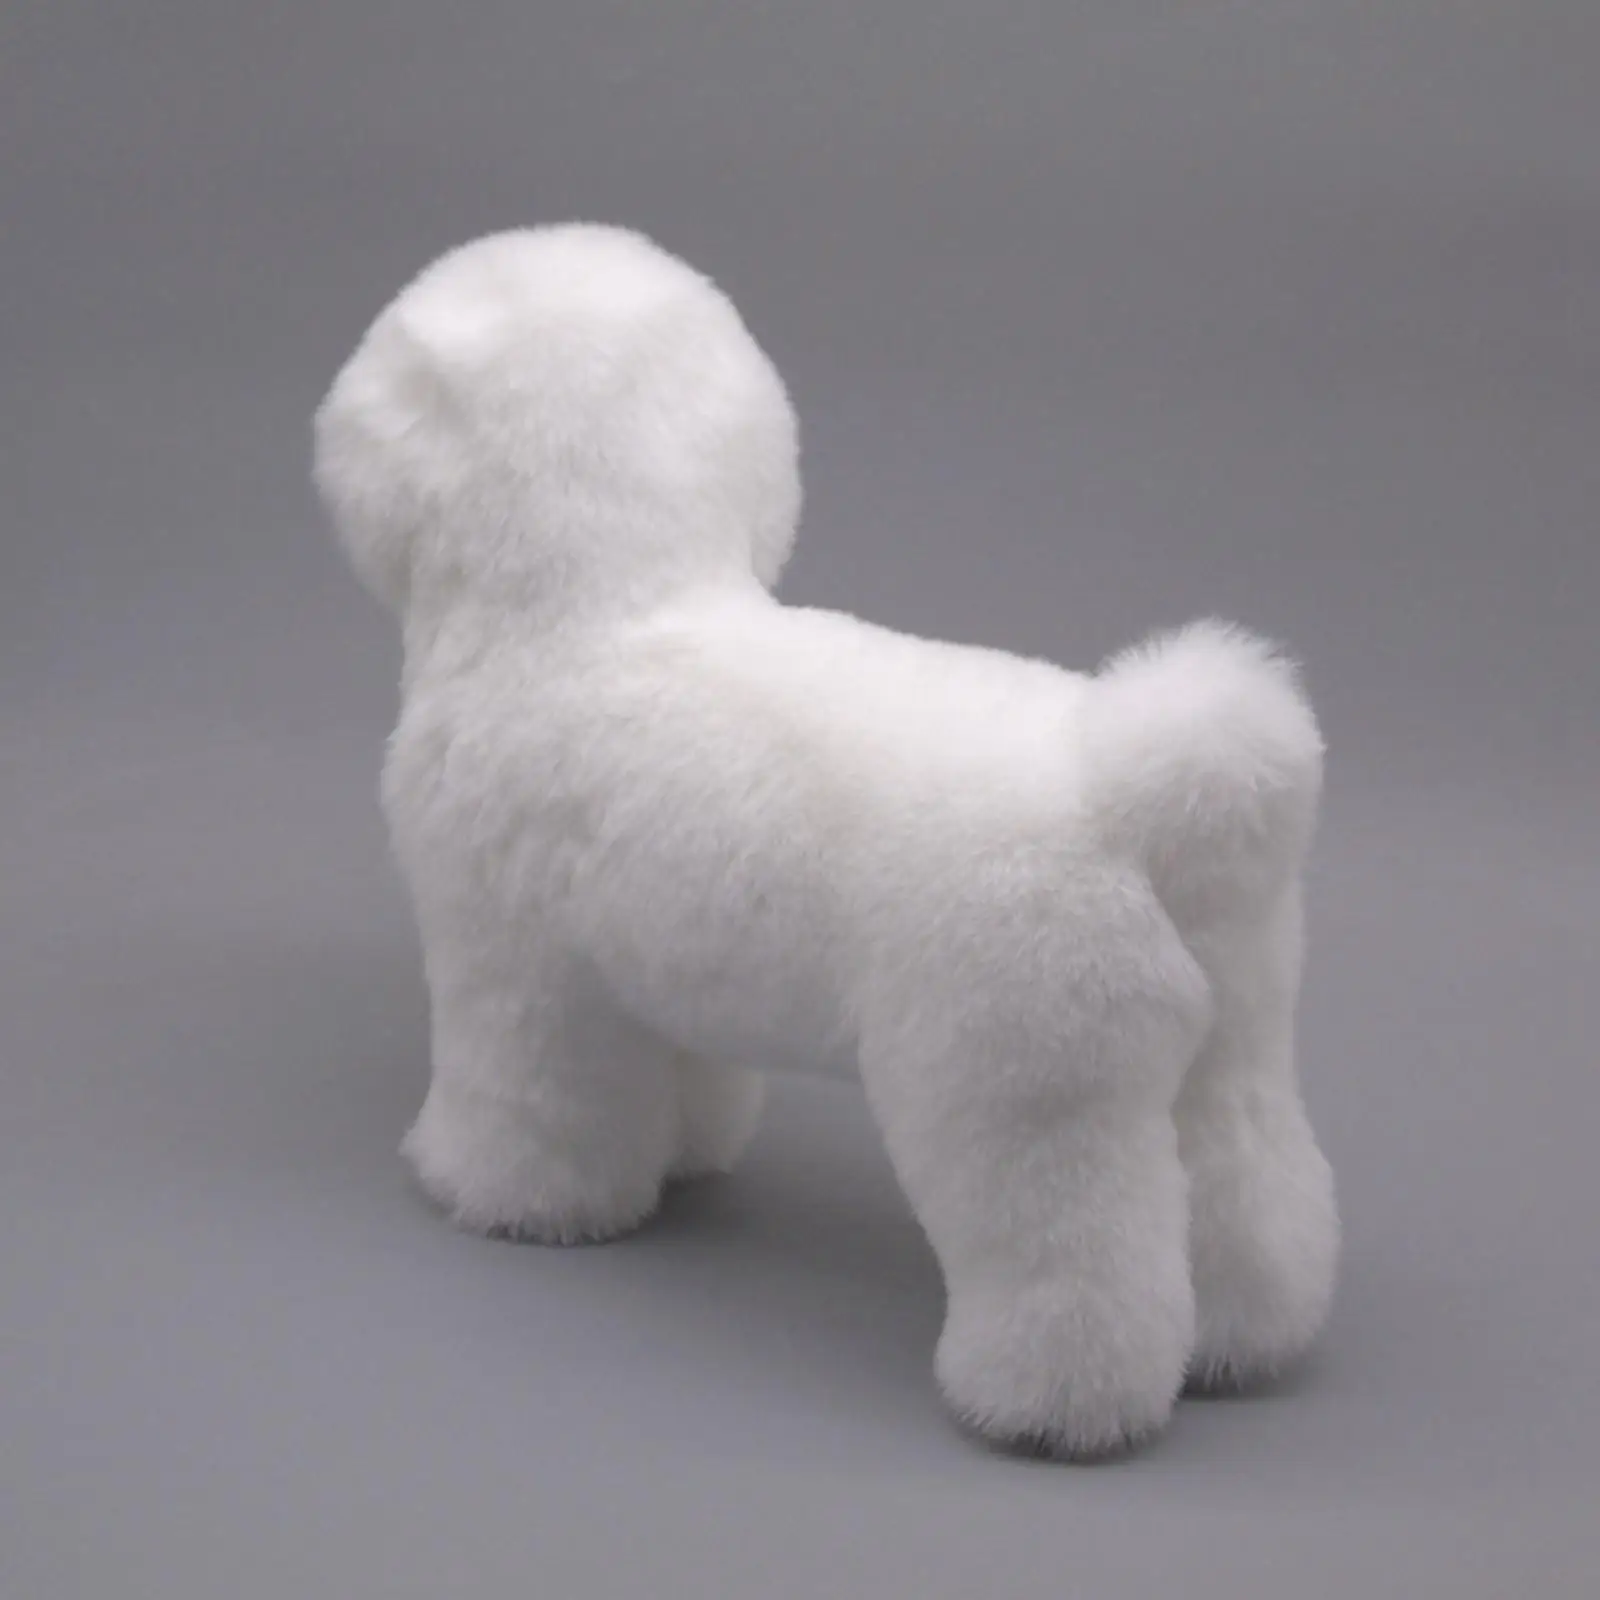 Soft Simulation White Dog Plush Toy Pet Gift for Kids Toddler Birthday Gifts